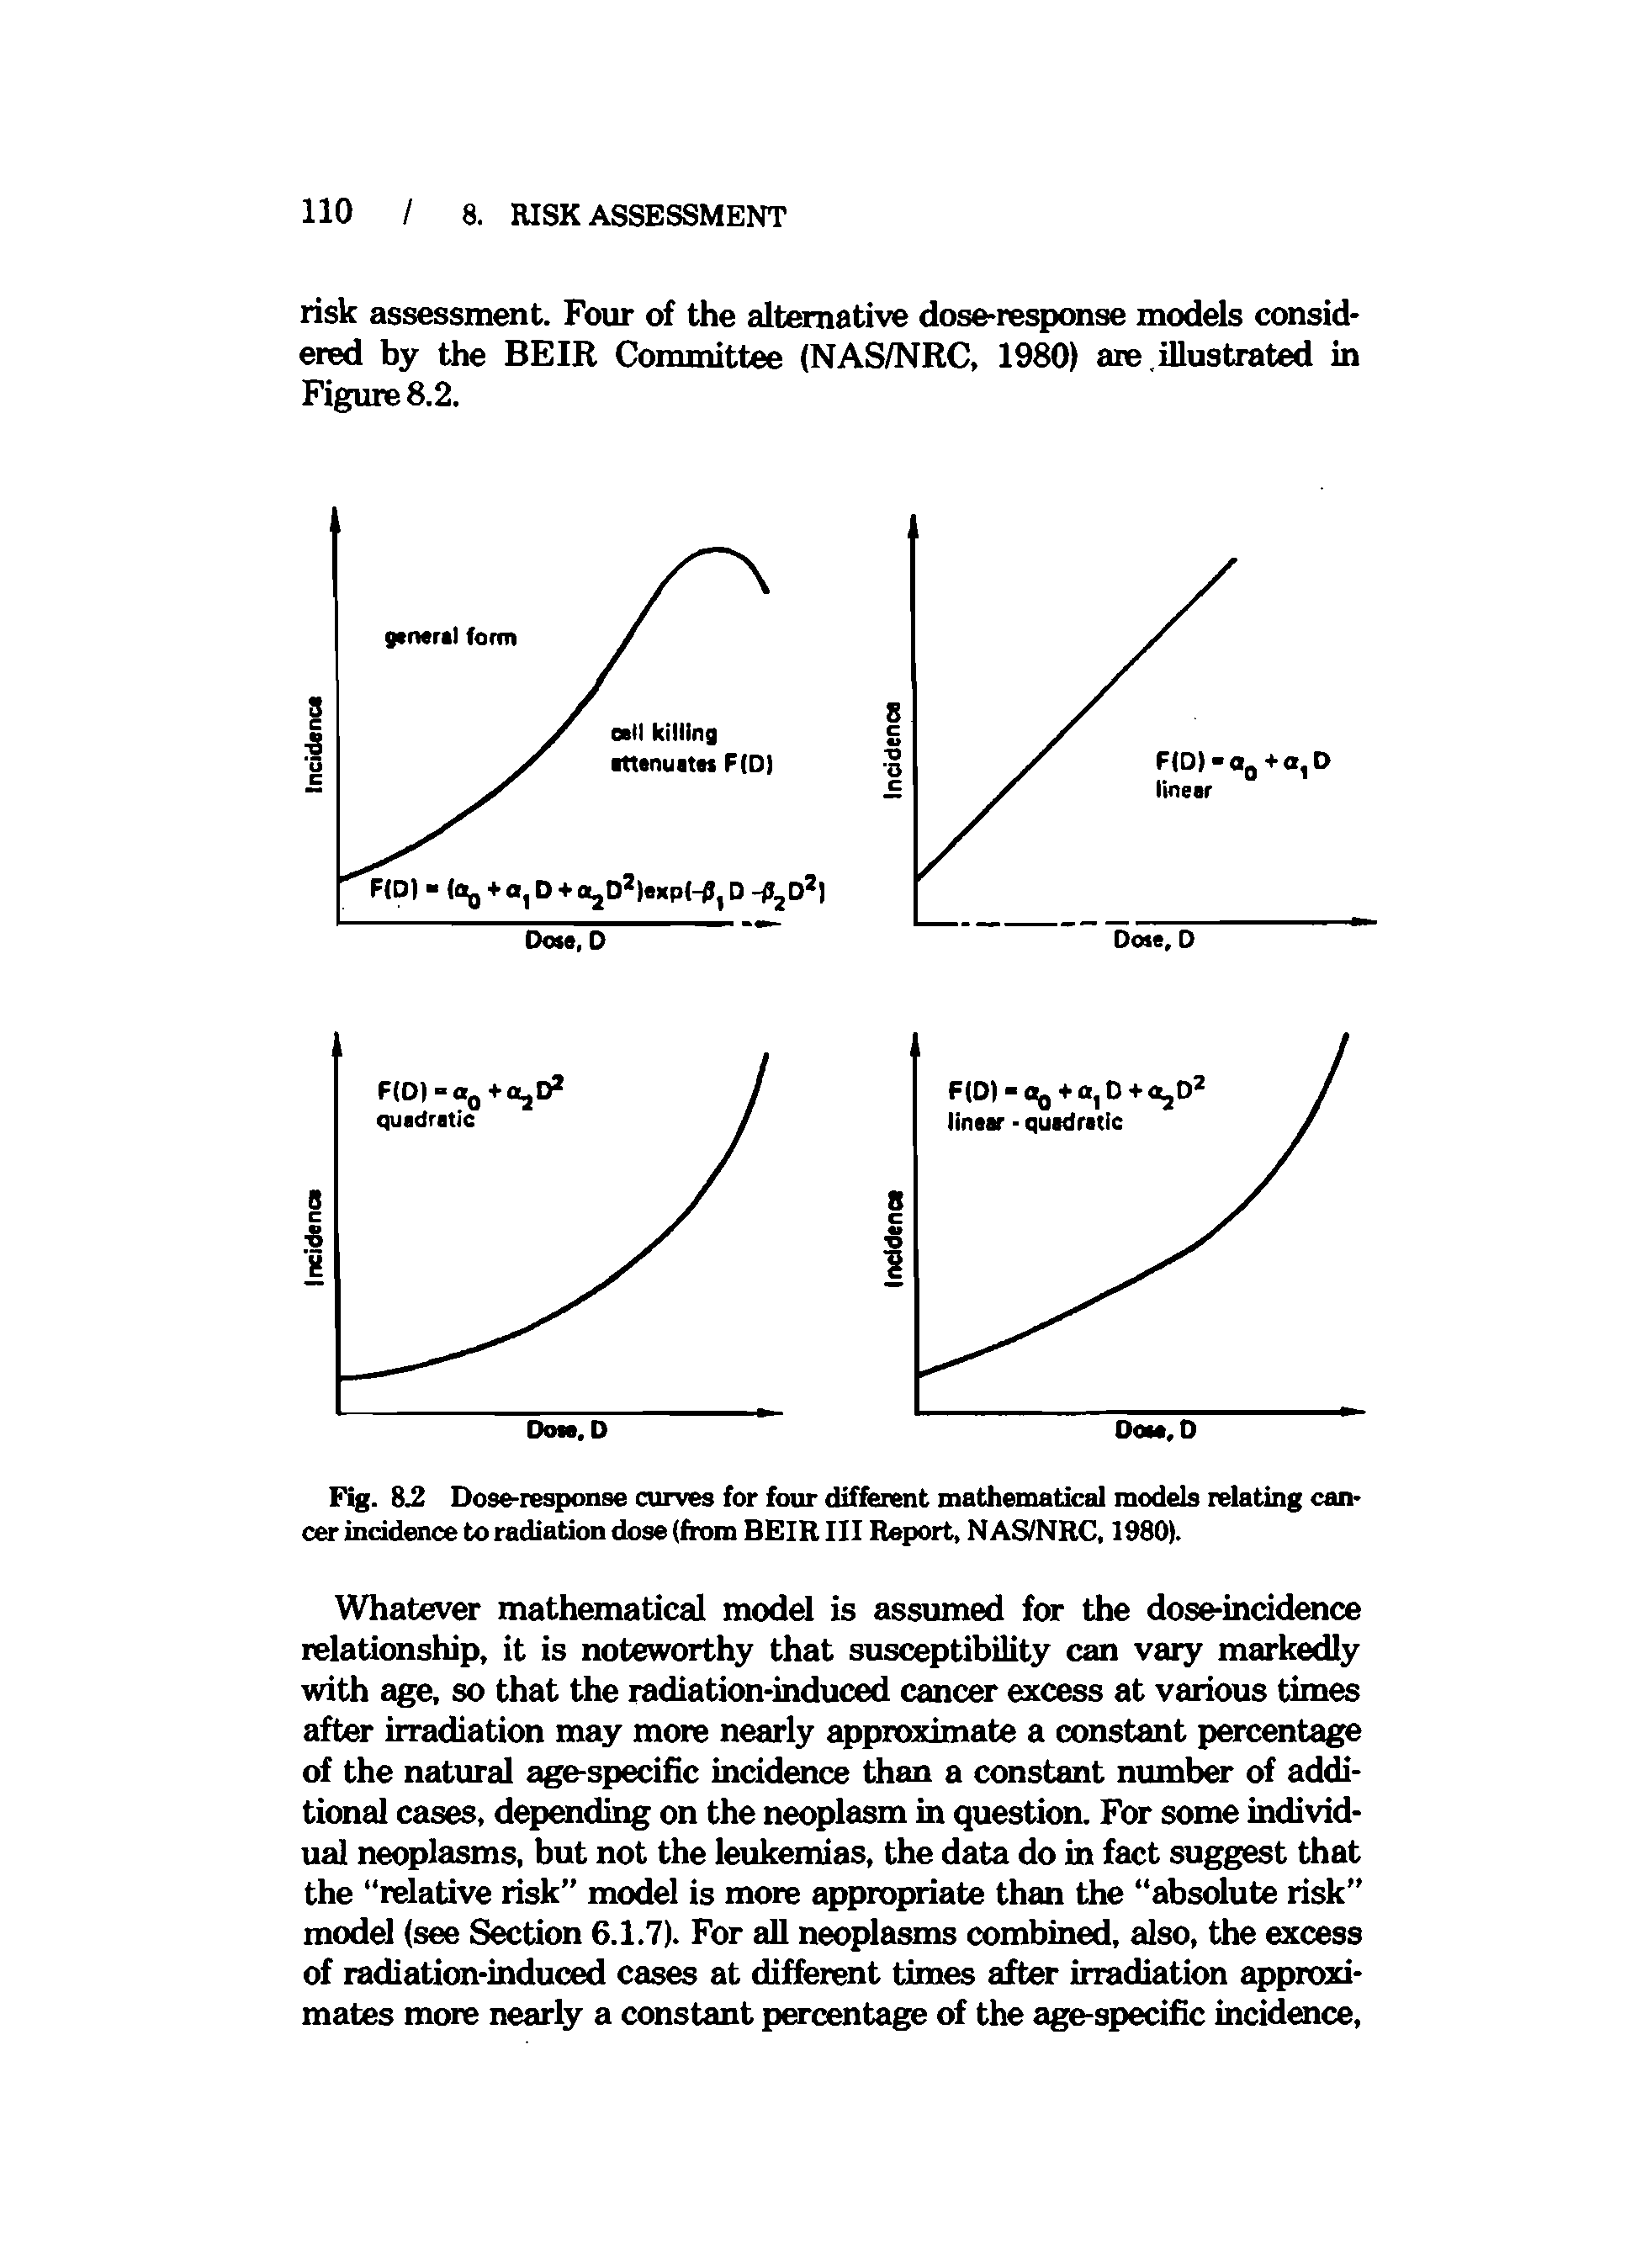 Fig. 8.2 Dose-response curves for four different mathematical models relating cancer incidence to radiation dose (from BEIR III Report, NAS/NRC, 1980).